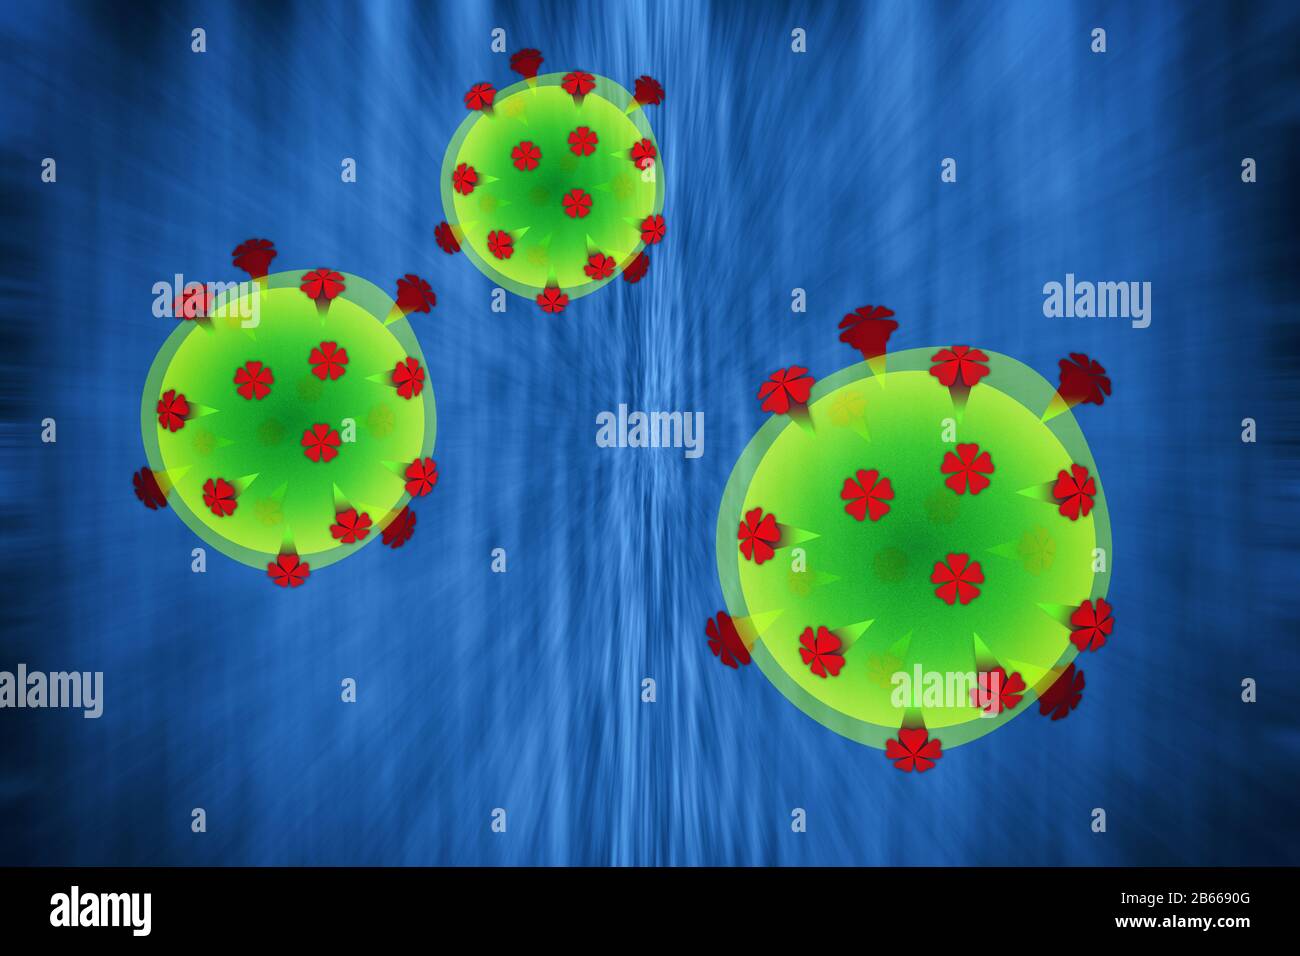 The covid-19 coronavirus - Illustrations showing a stylized composition of the Covid-19 cornovirus as it could be seen under a microscope Stock Photo